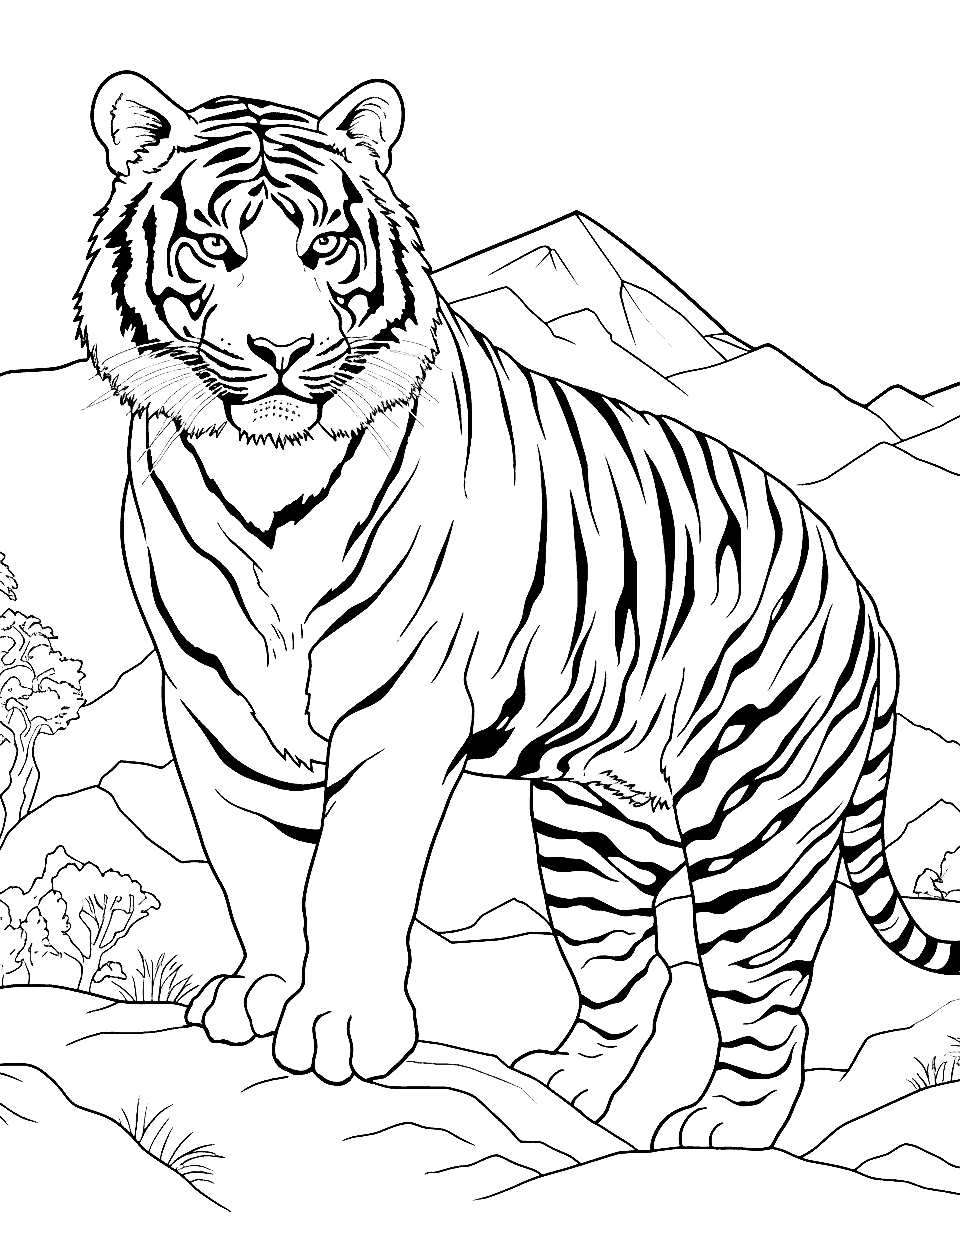 Mountainous Retreat Tiger Coloring Page - A tiger overlooking a valley from a mountain perch.